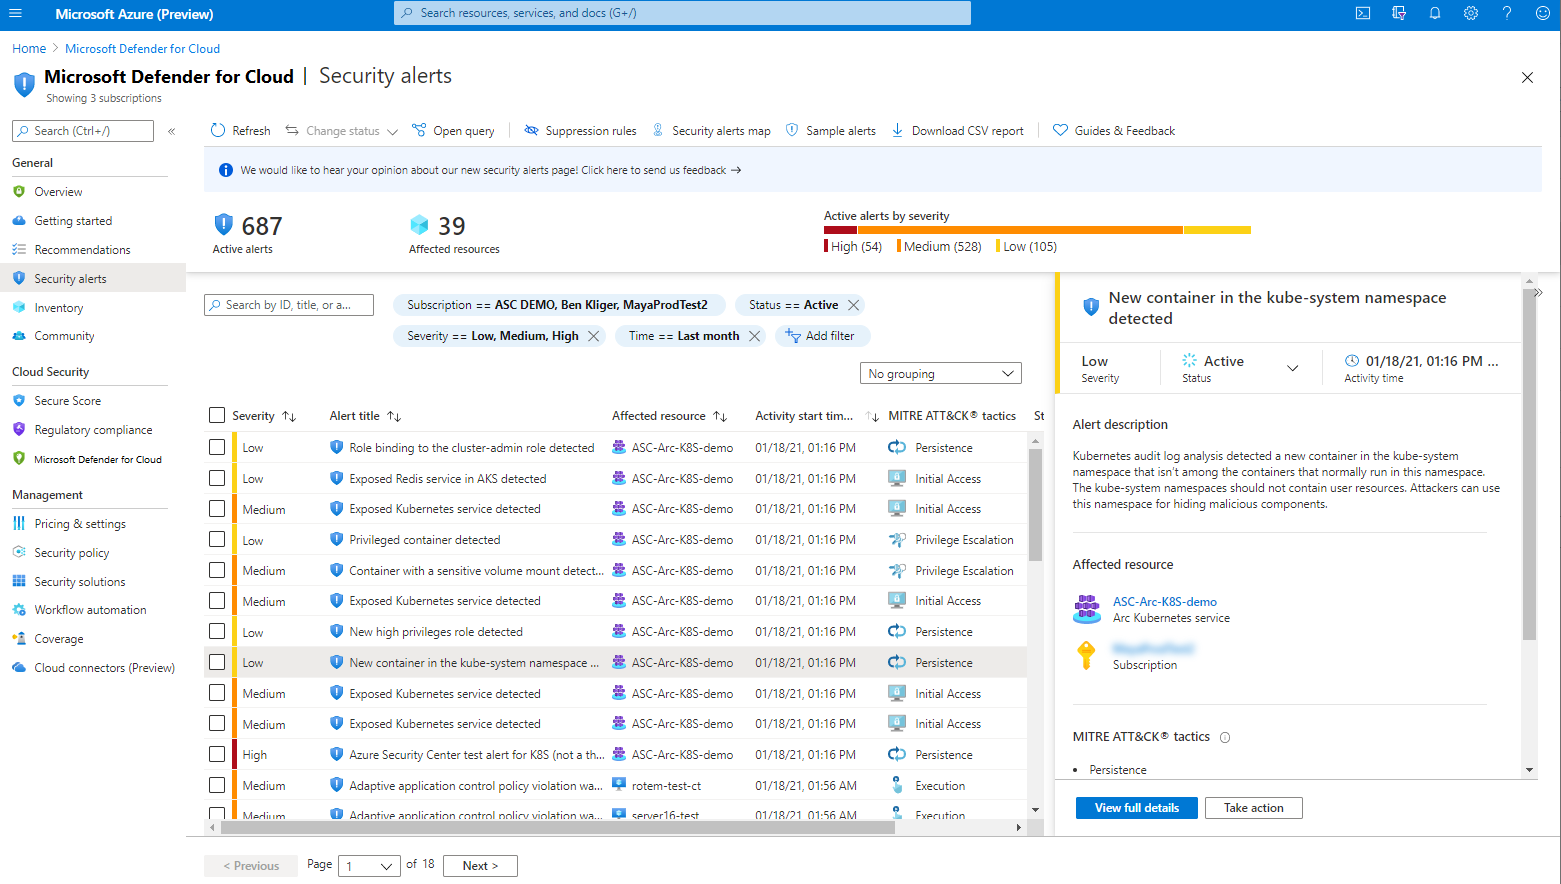 Screenshot showing Microsoft Defender for Cloud's security alerts page.